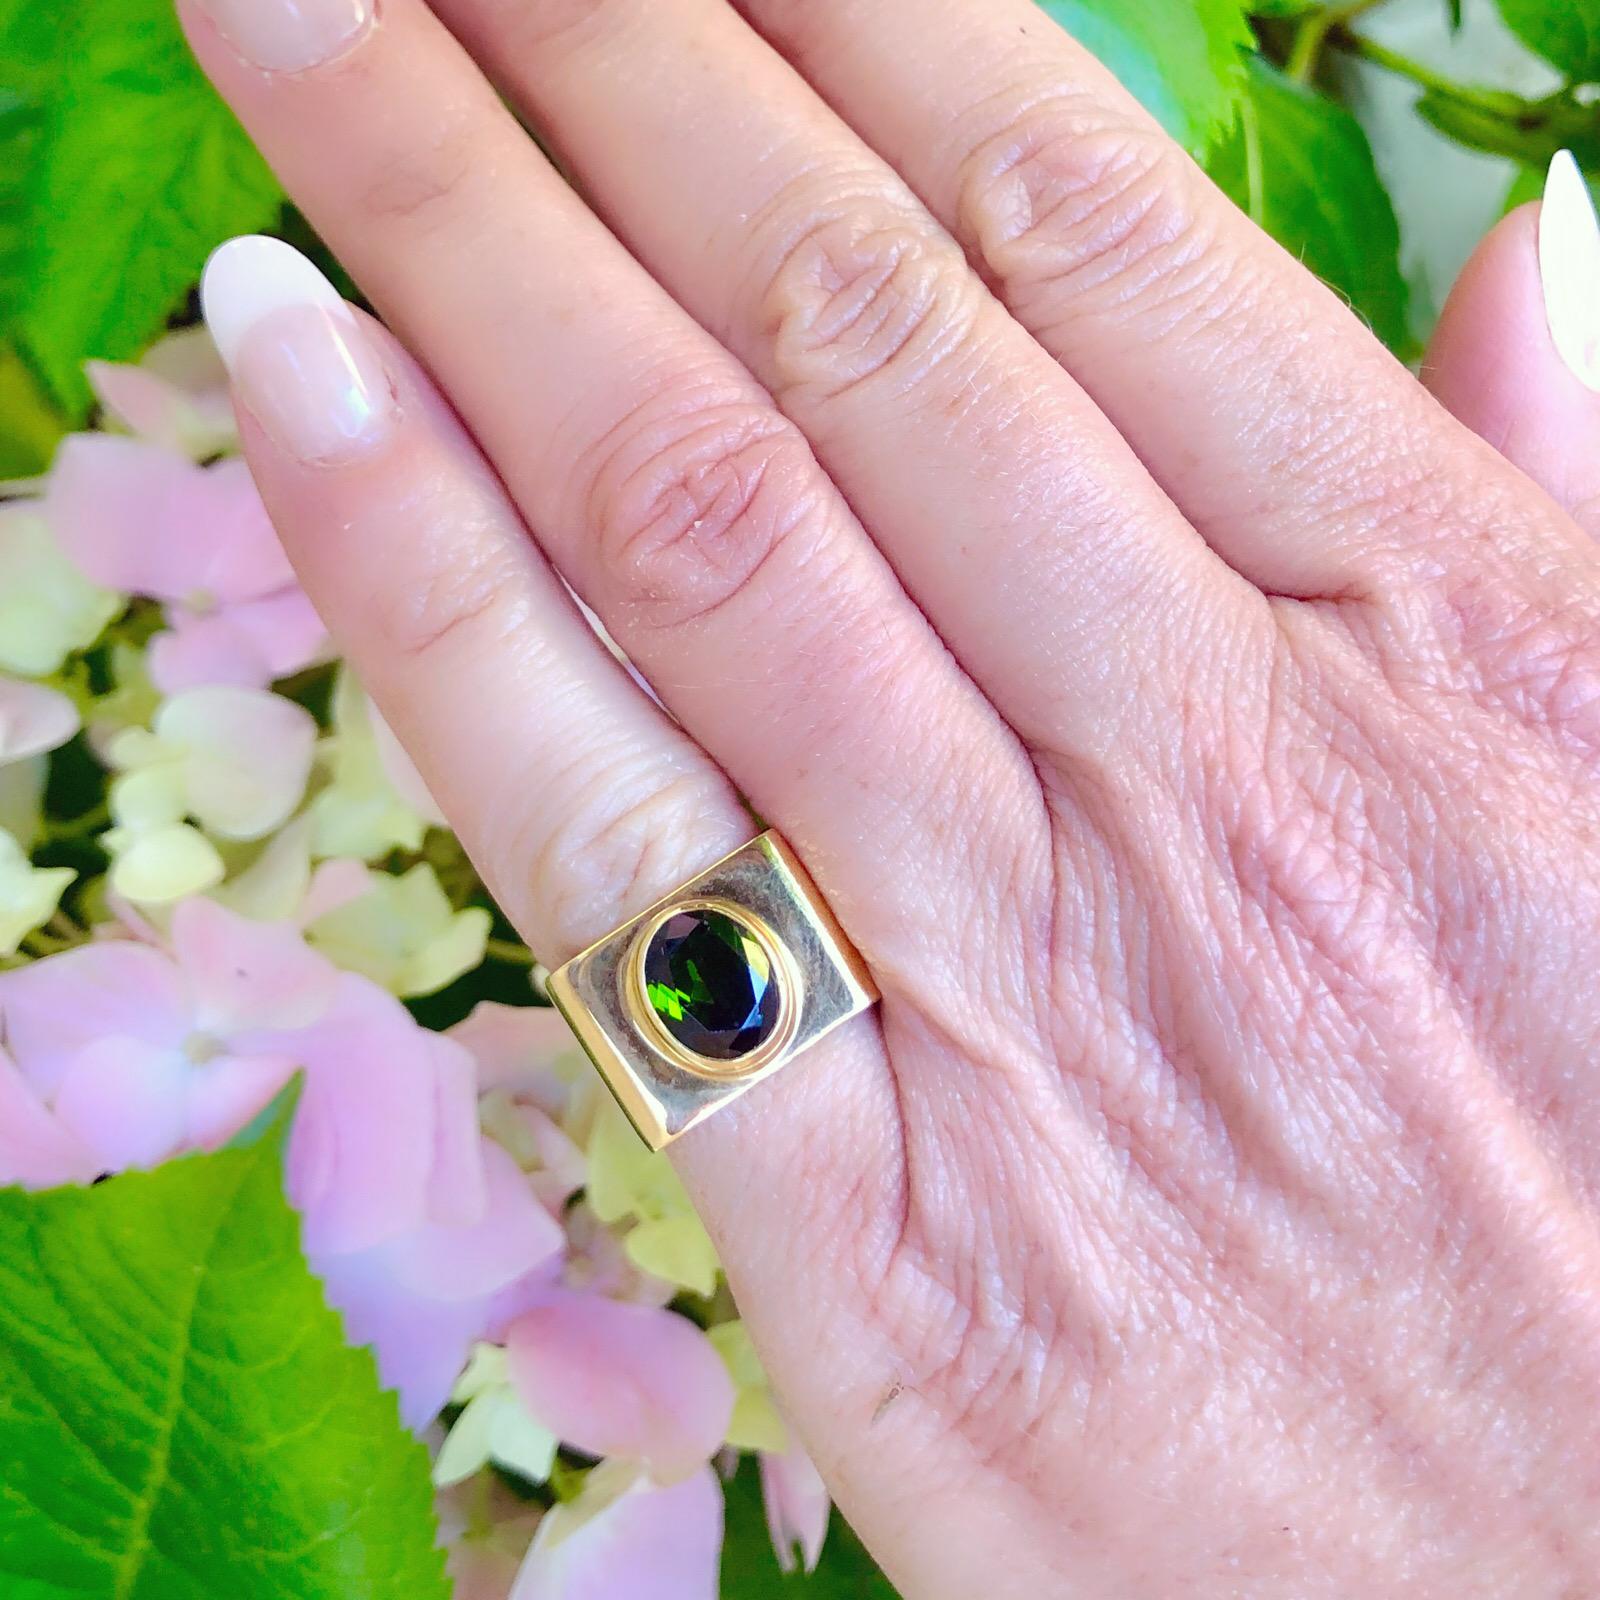 Cartier Dinh Van ring in 18k yellow gold square setting with an oval mixed cut green tourmaline.  The ring is a size 5 3/4.  A modern unconventional ring designed by French Vietnamese jeweller Jean Dinh Van.